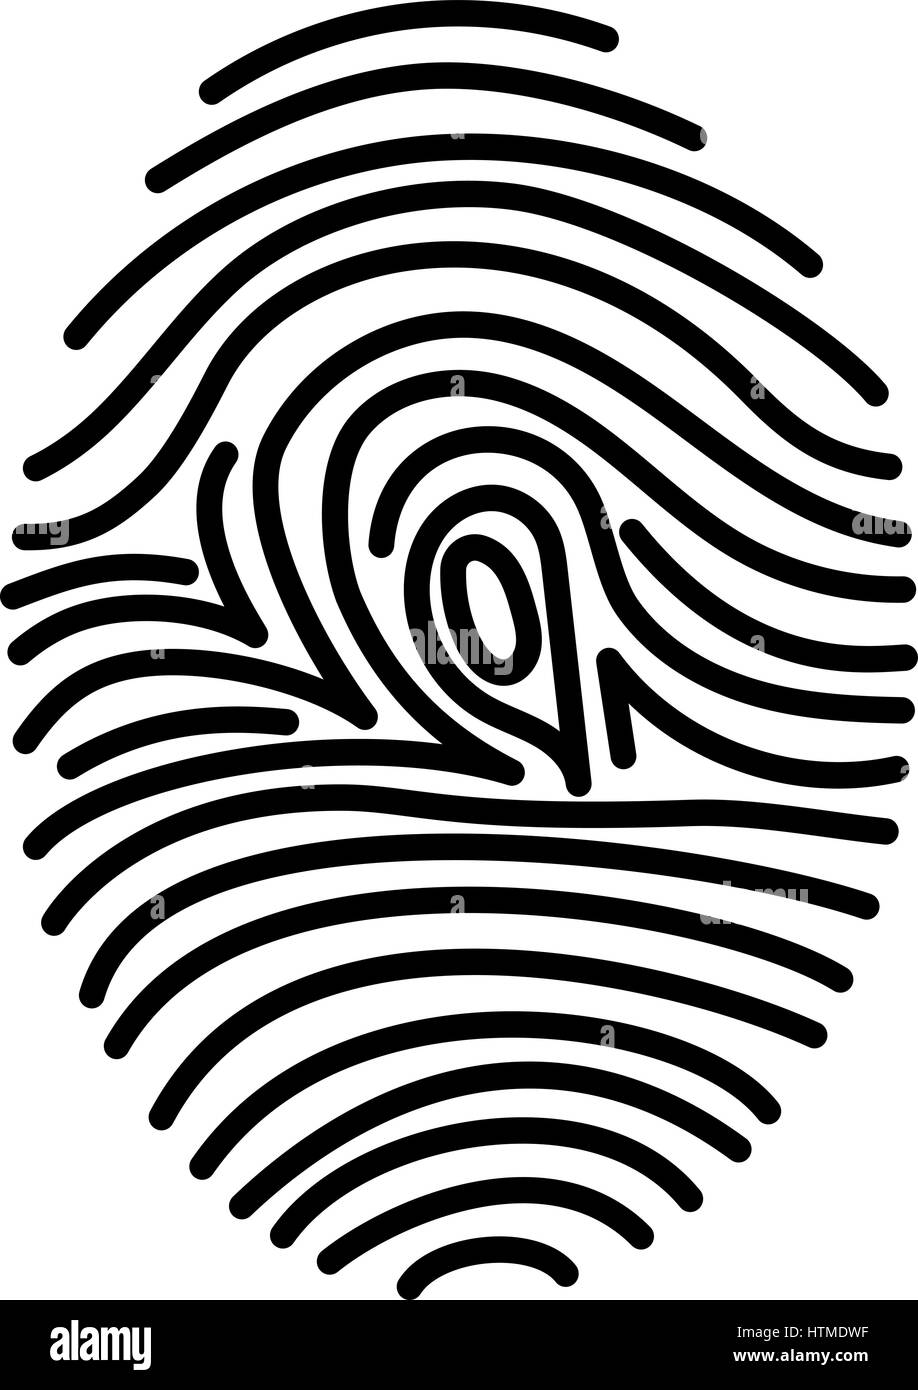 Fingerprint line icon. Vector design template elements for your application or corporate identity. Stock Vector